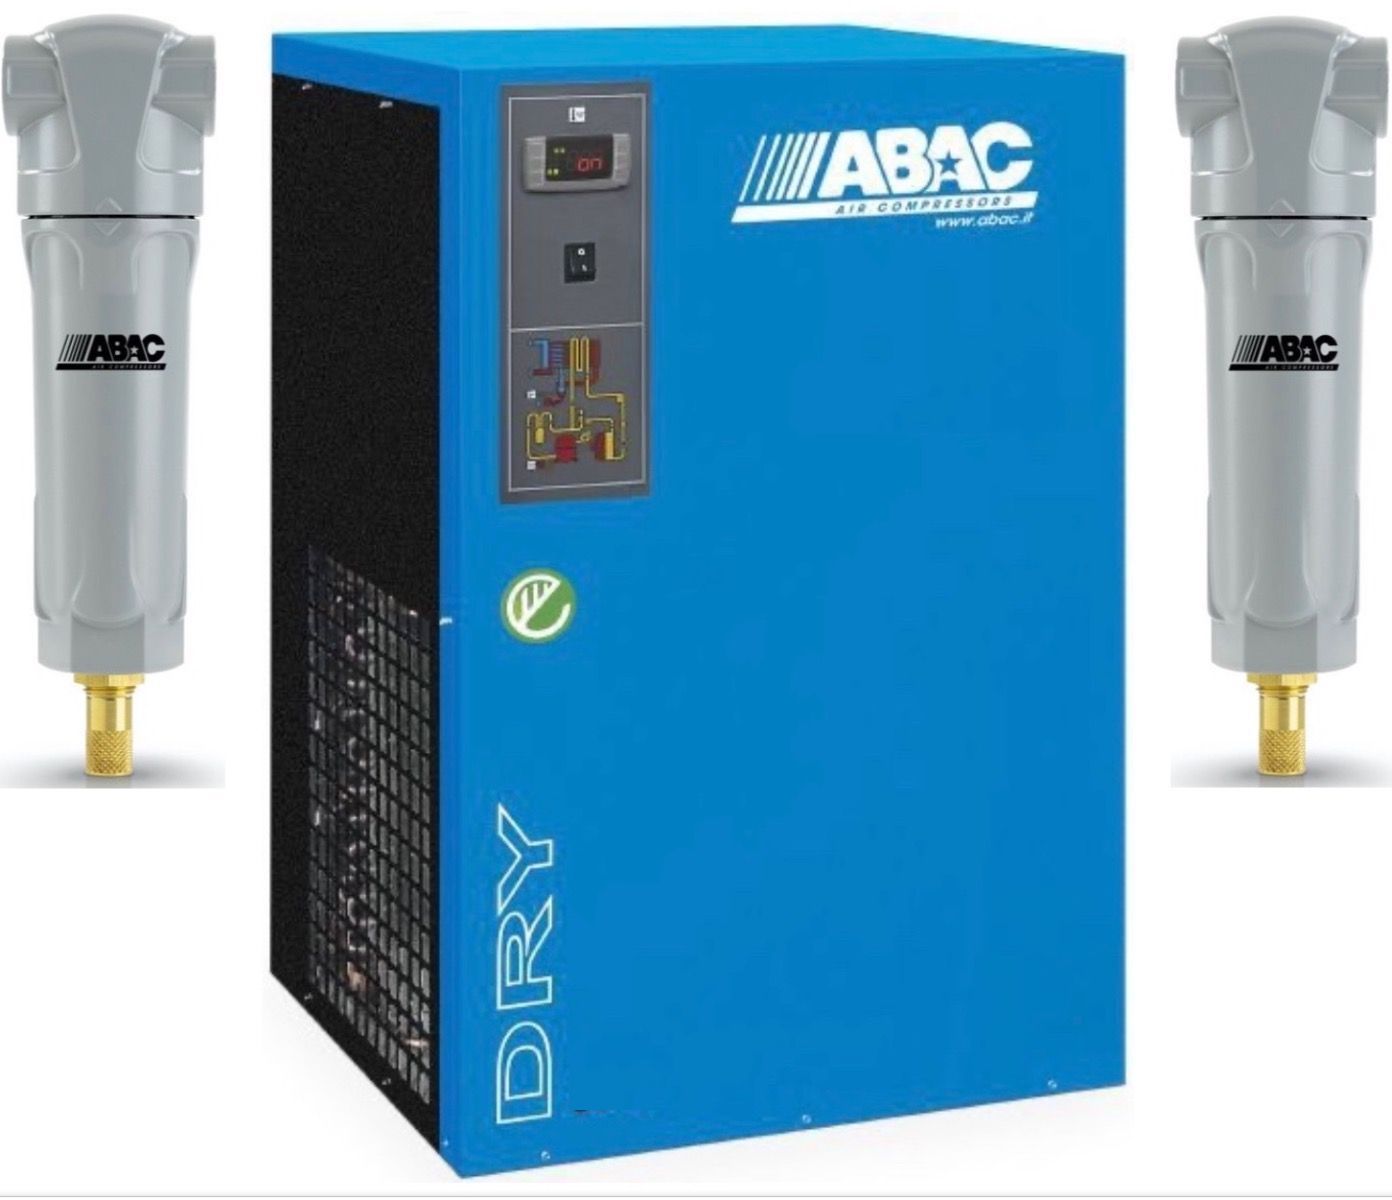 Abac DRY 165 104 cfm Compressed Air Dryer & Filters